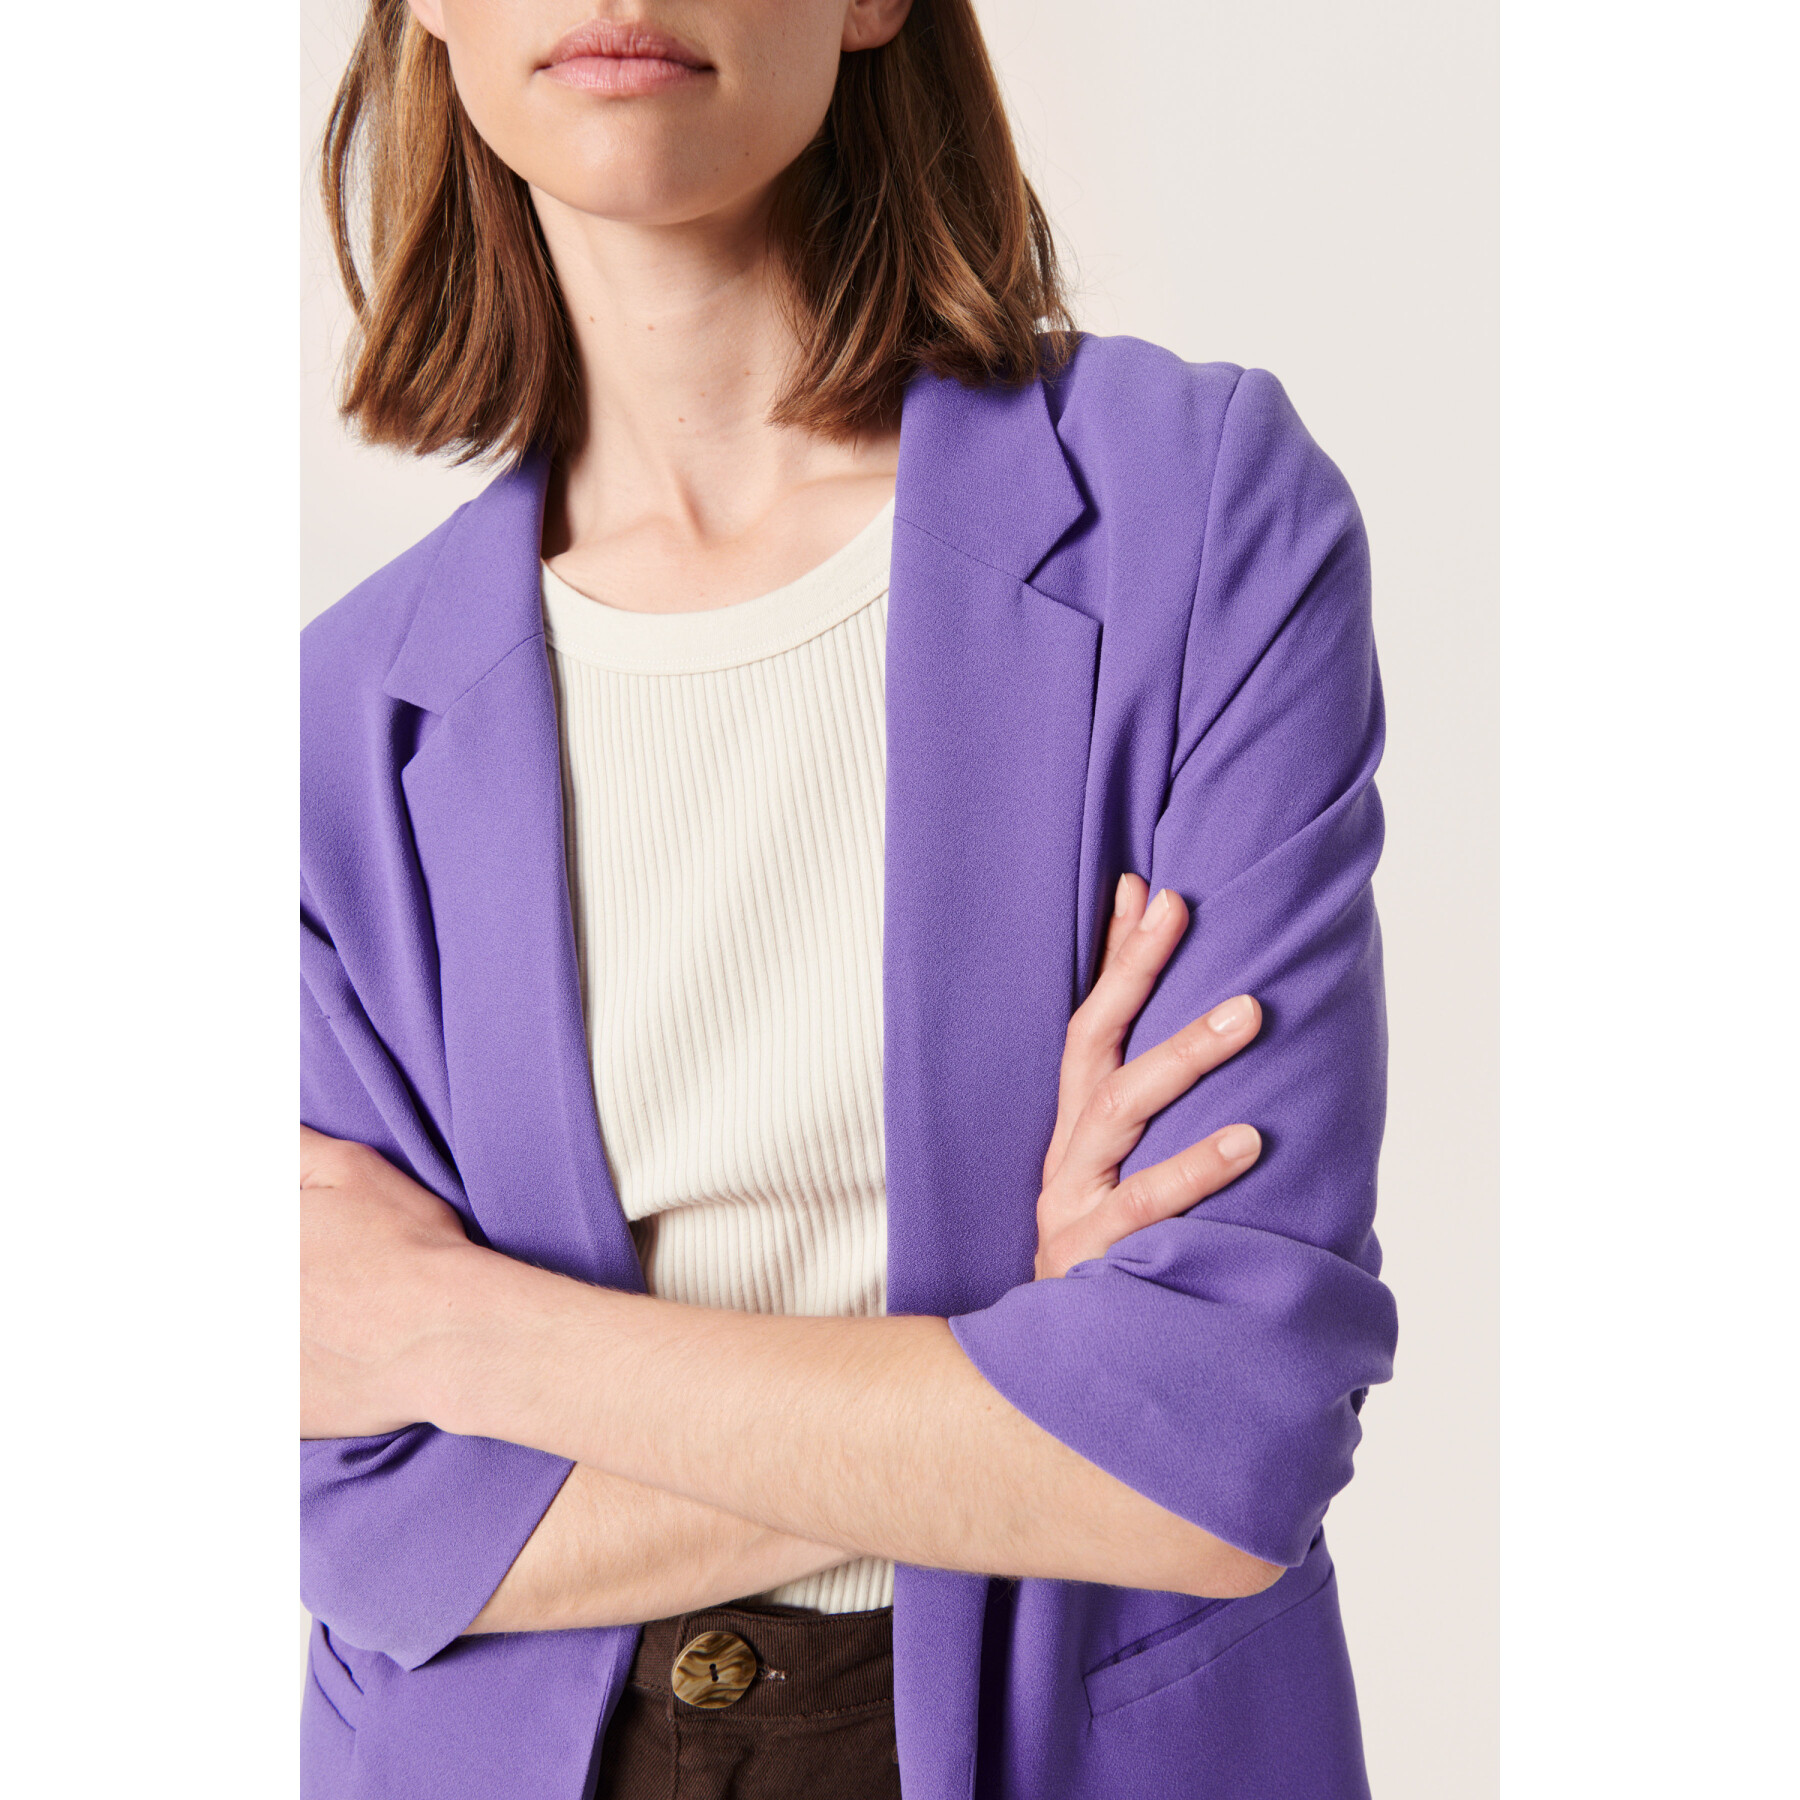 Blazer para mulher Soaked in Luxury Shirley